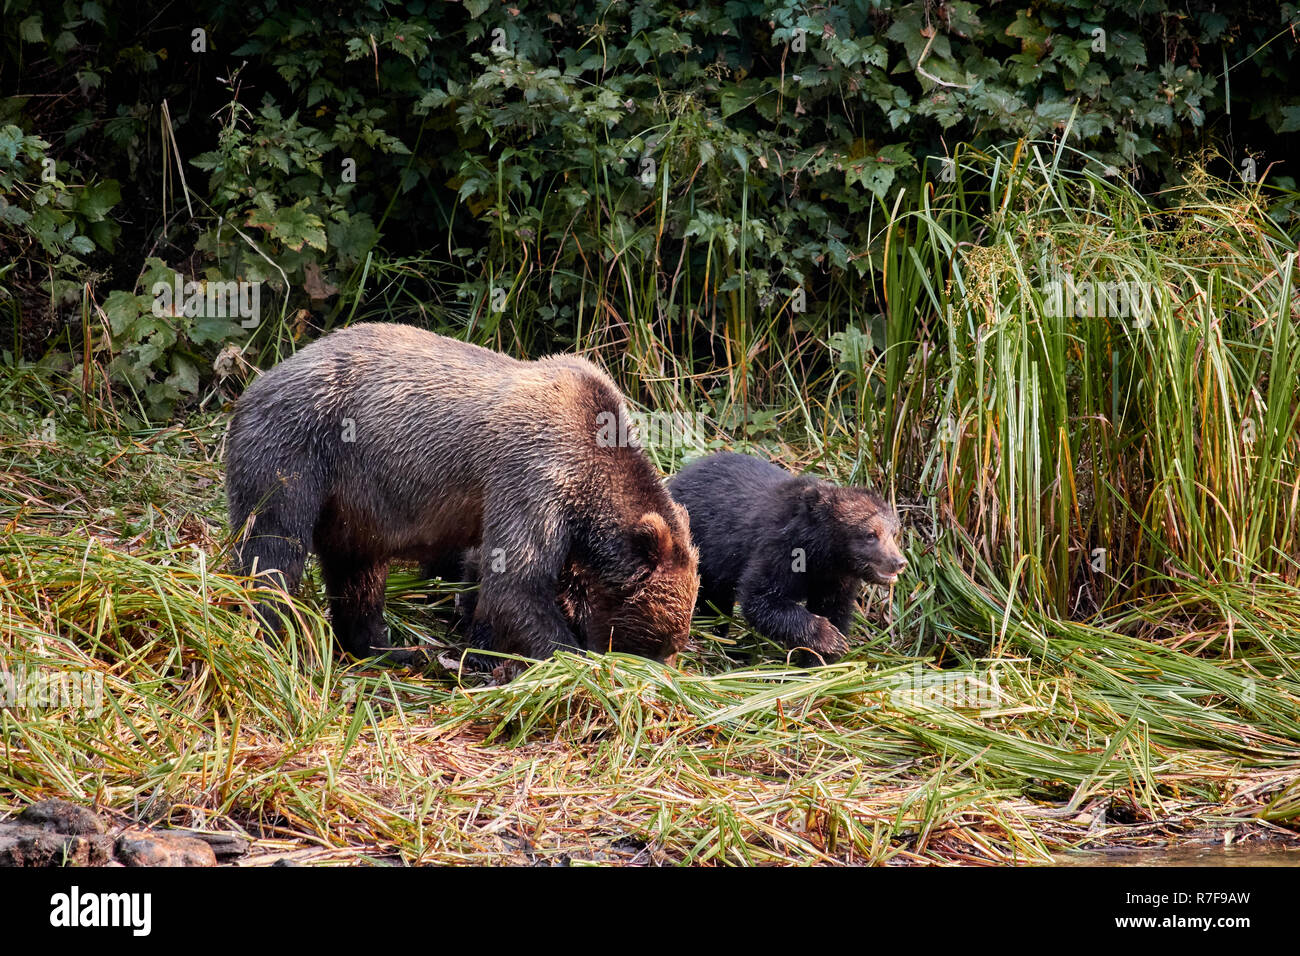 Grizzly bear sow and cubs, Great Bear Rainforest Stock Photo